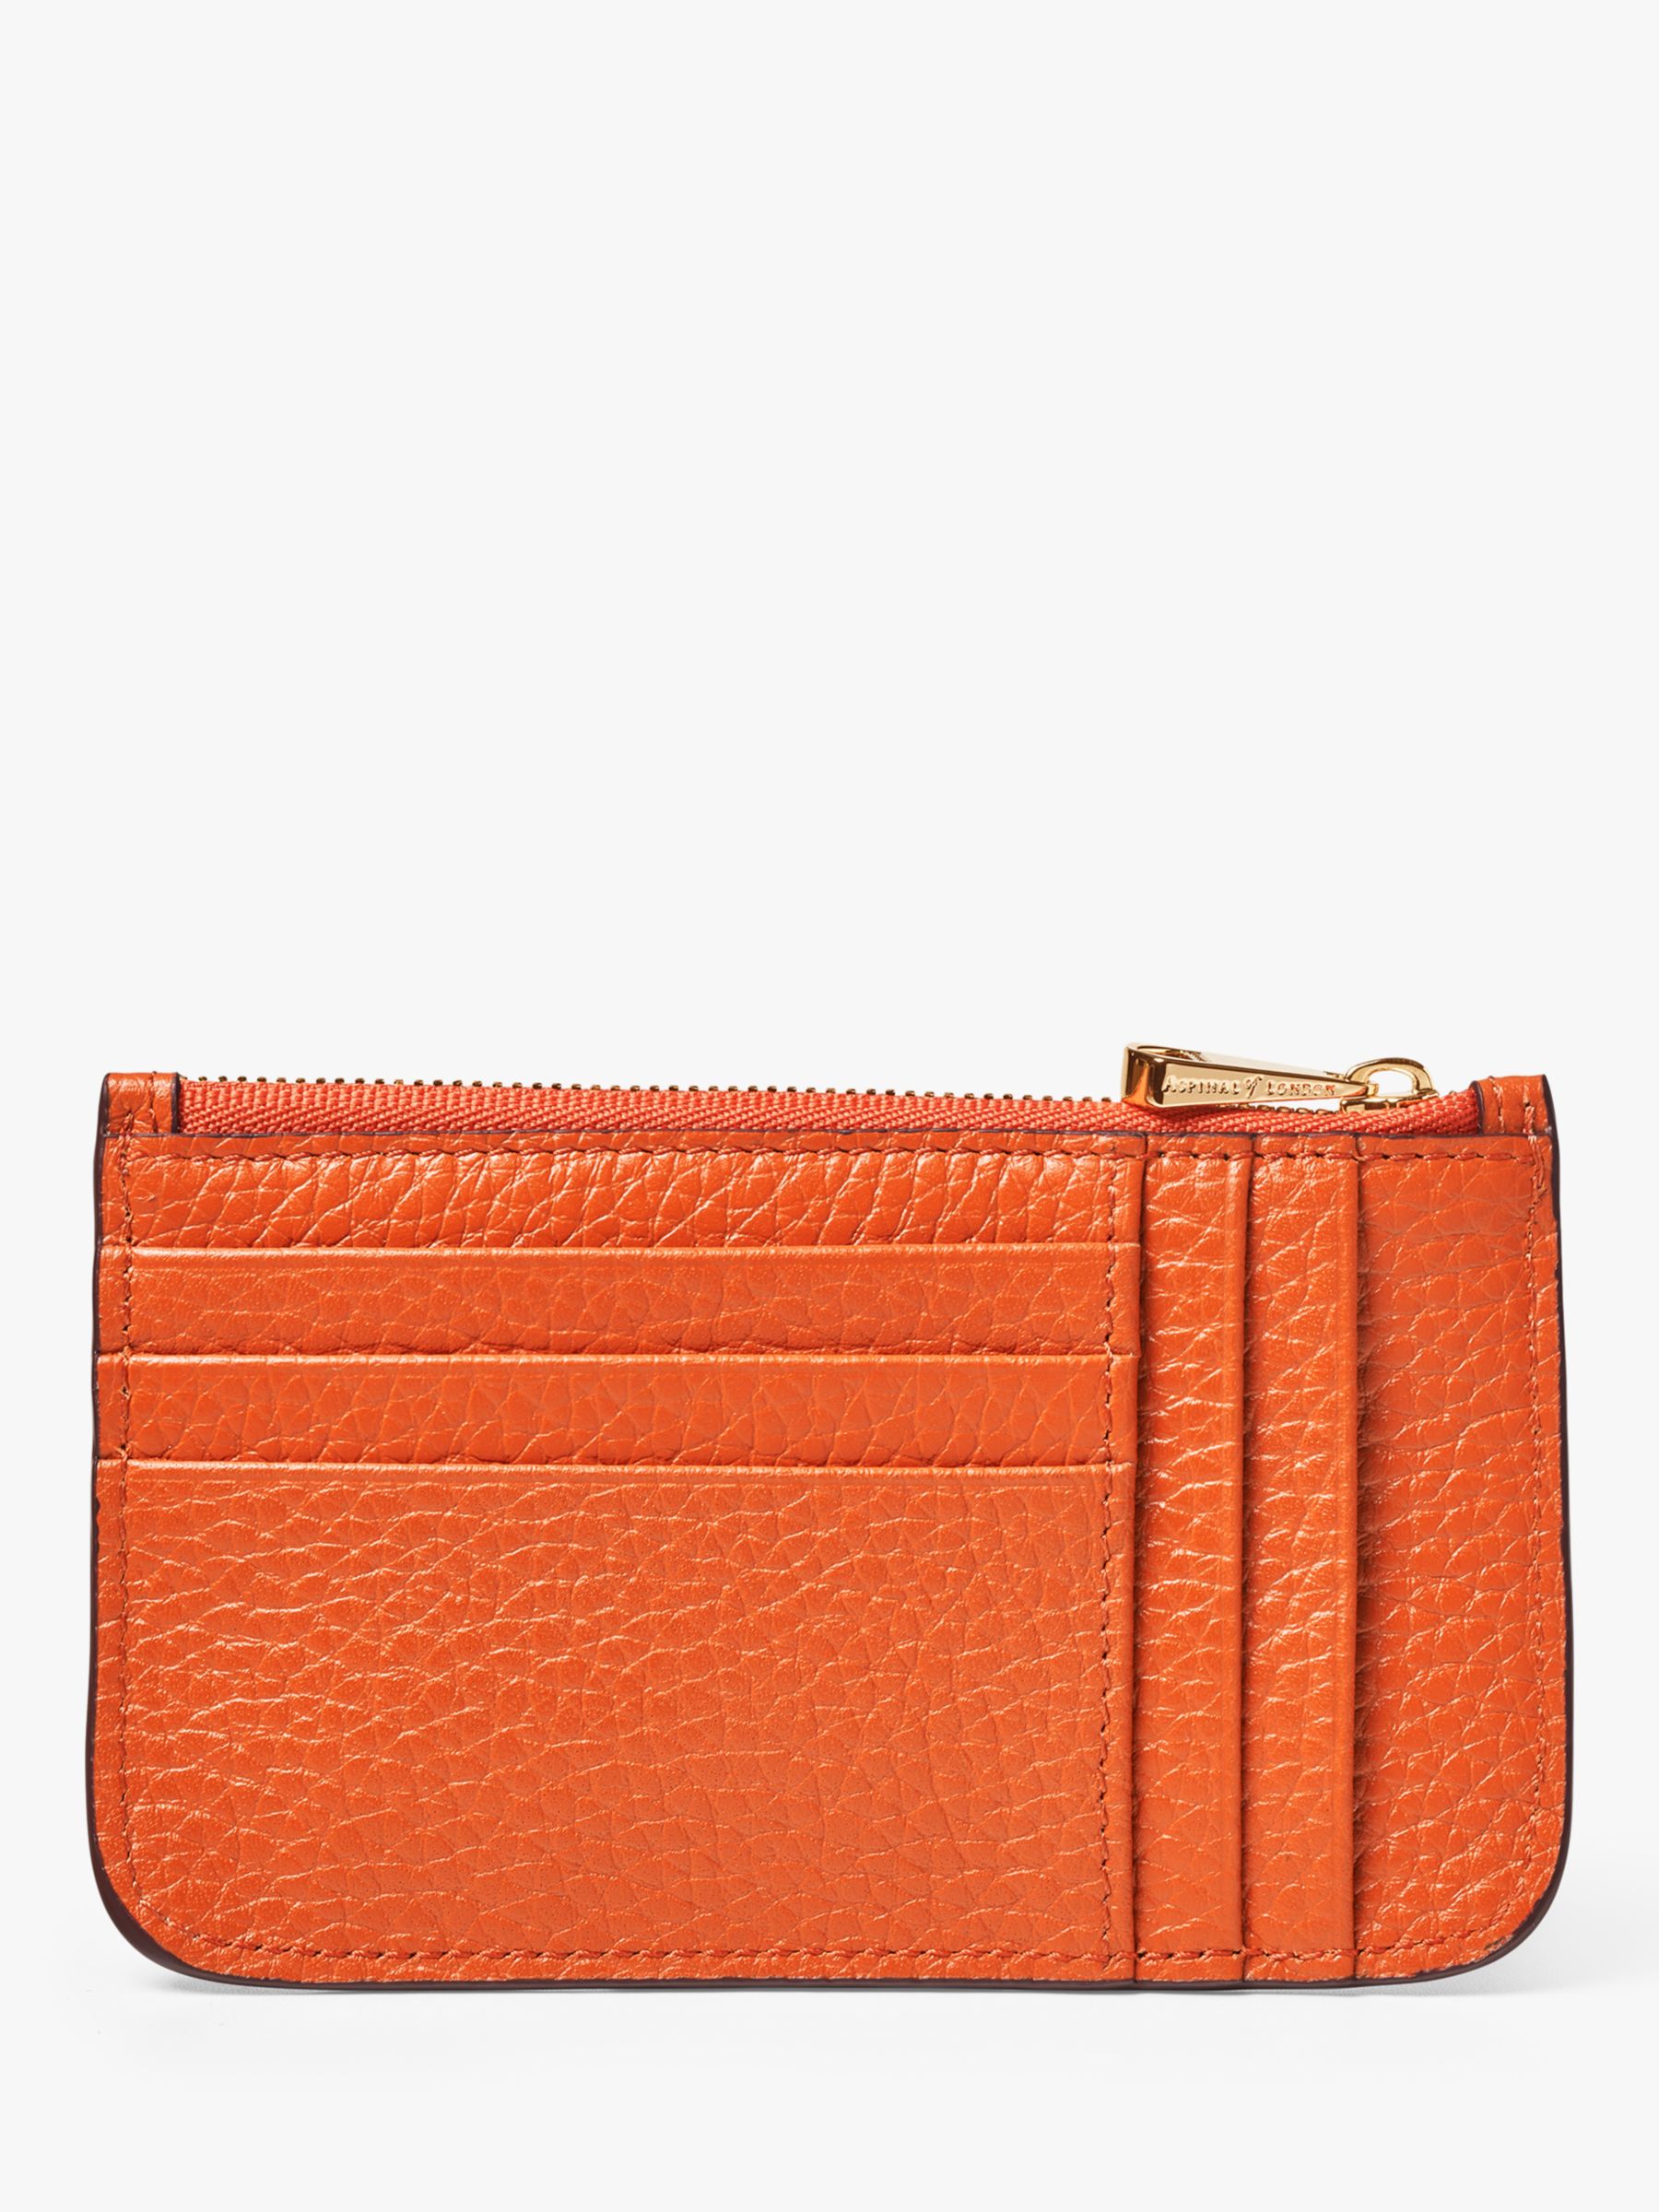 Buy Aspinal of London Ella Pebble Grain Leather Card and Coin Holder Online at johnlewis.com